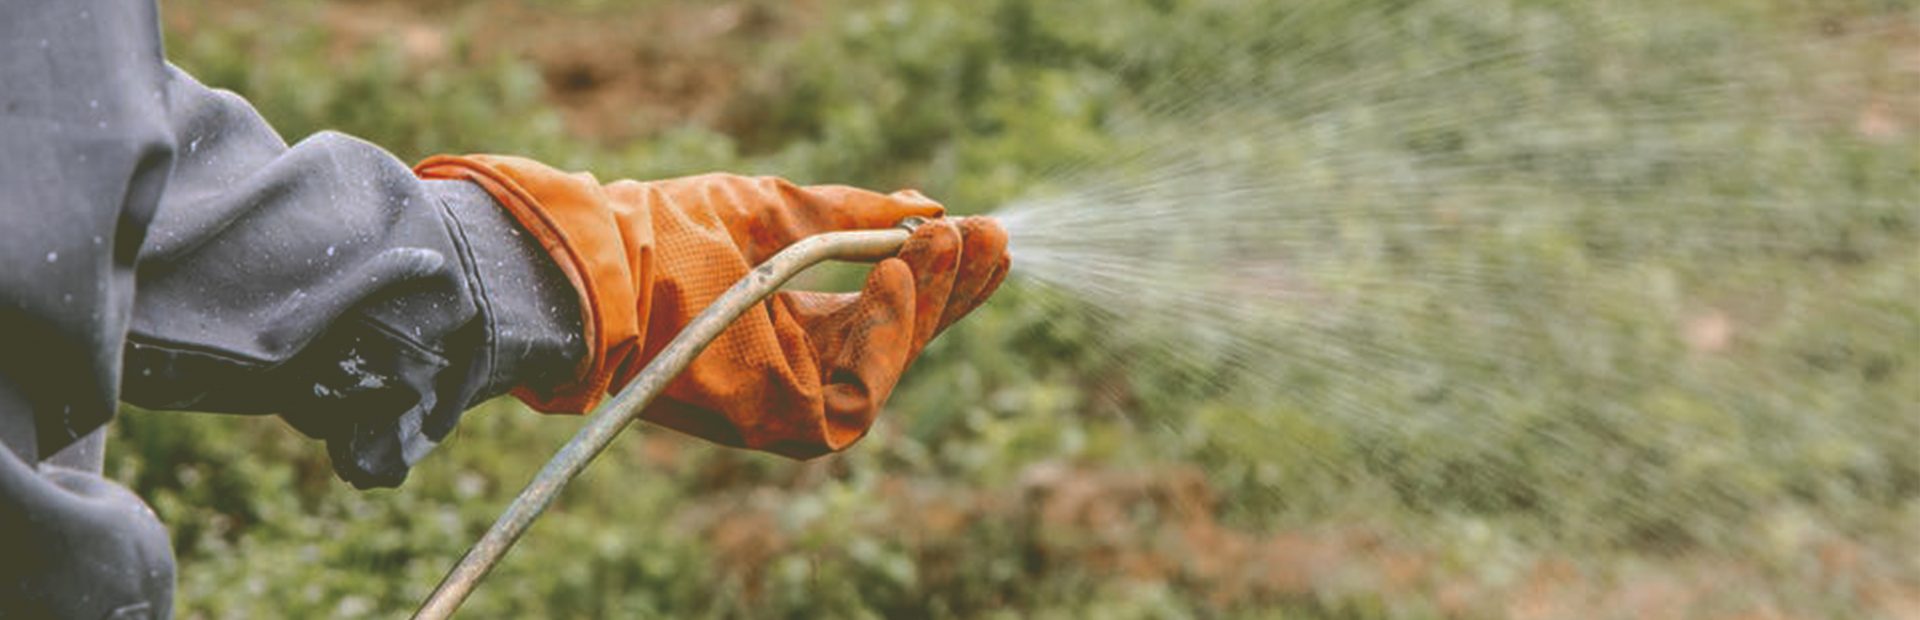 A person wearing protective gear applies herbicide, also known as weedkiller